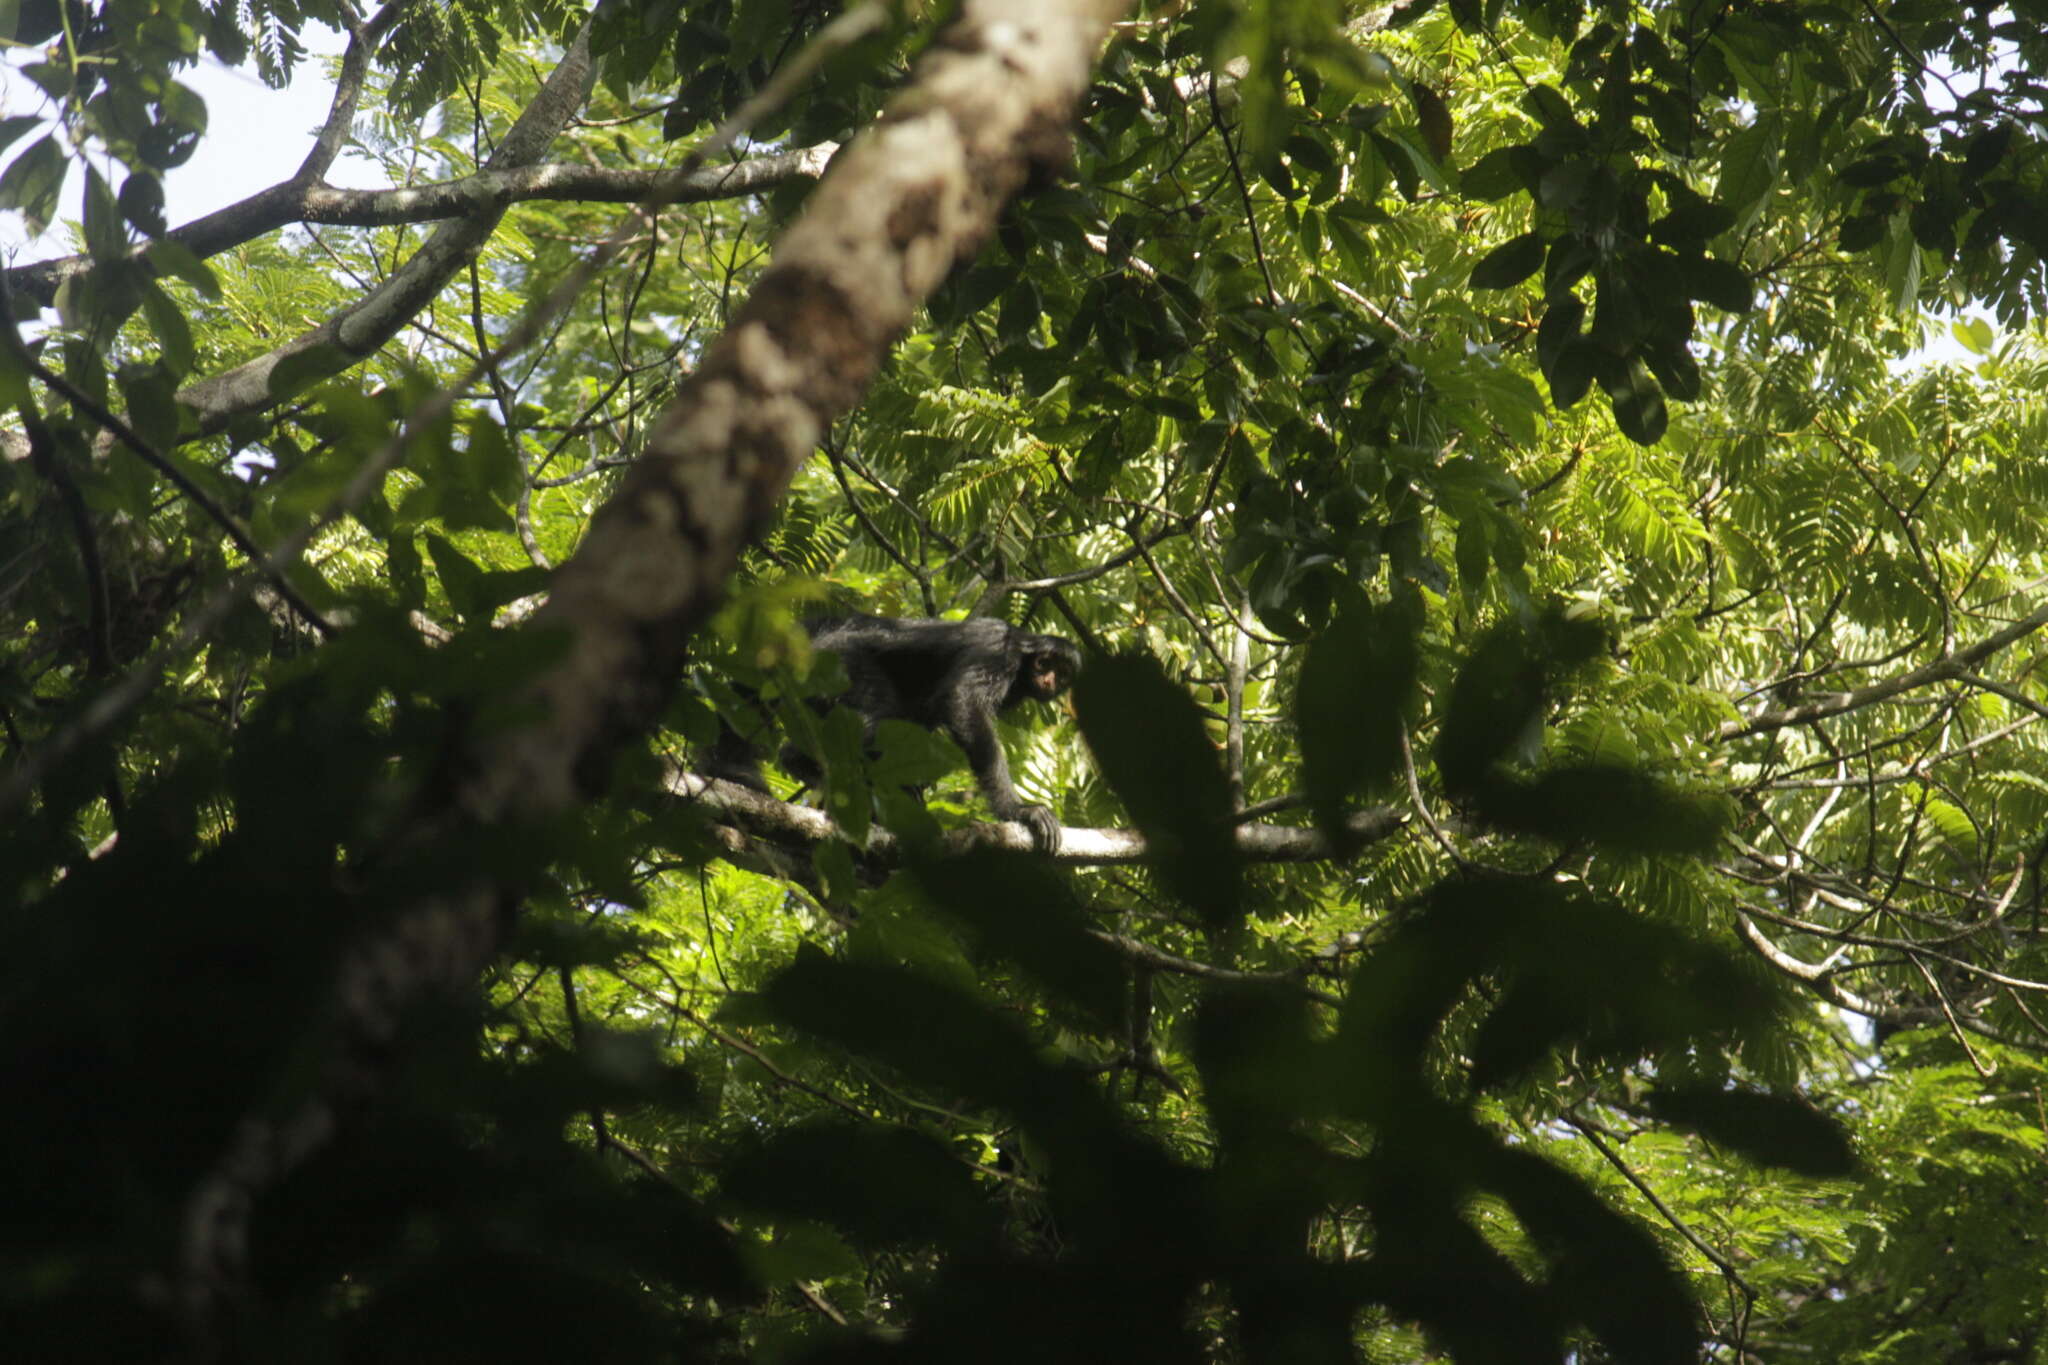 Image of Red-faced Spider Monkey